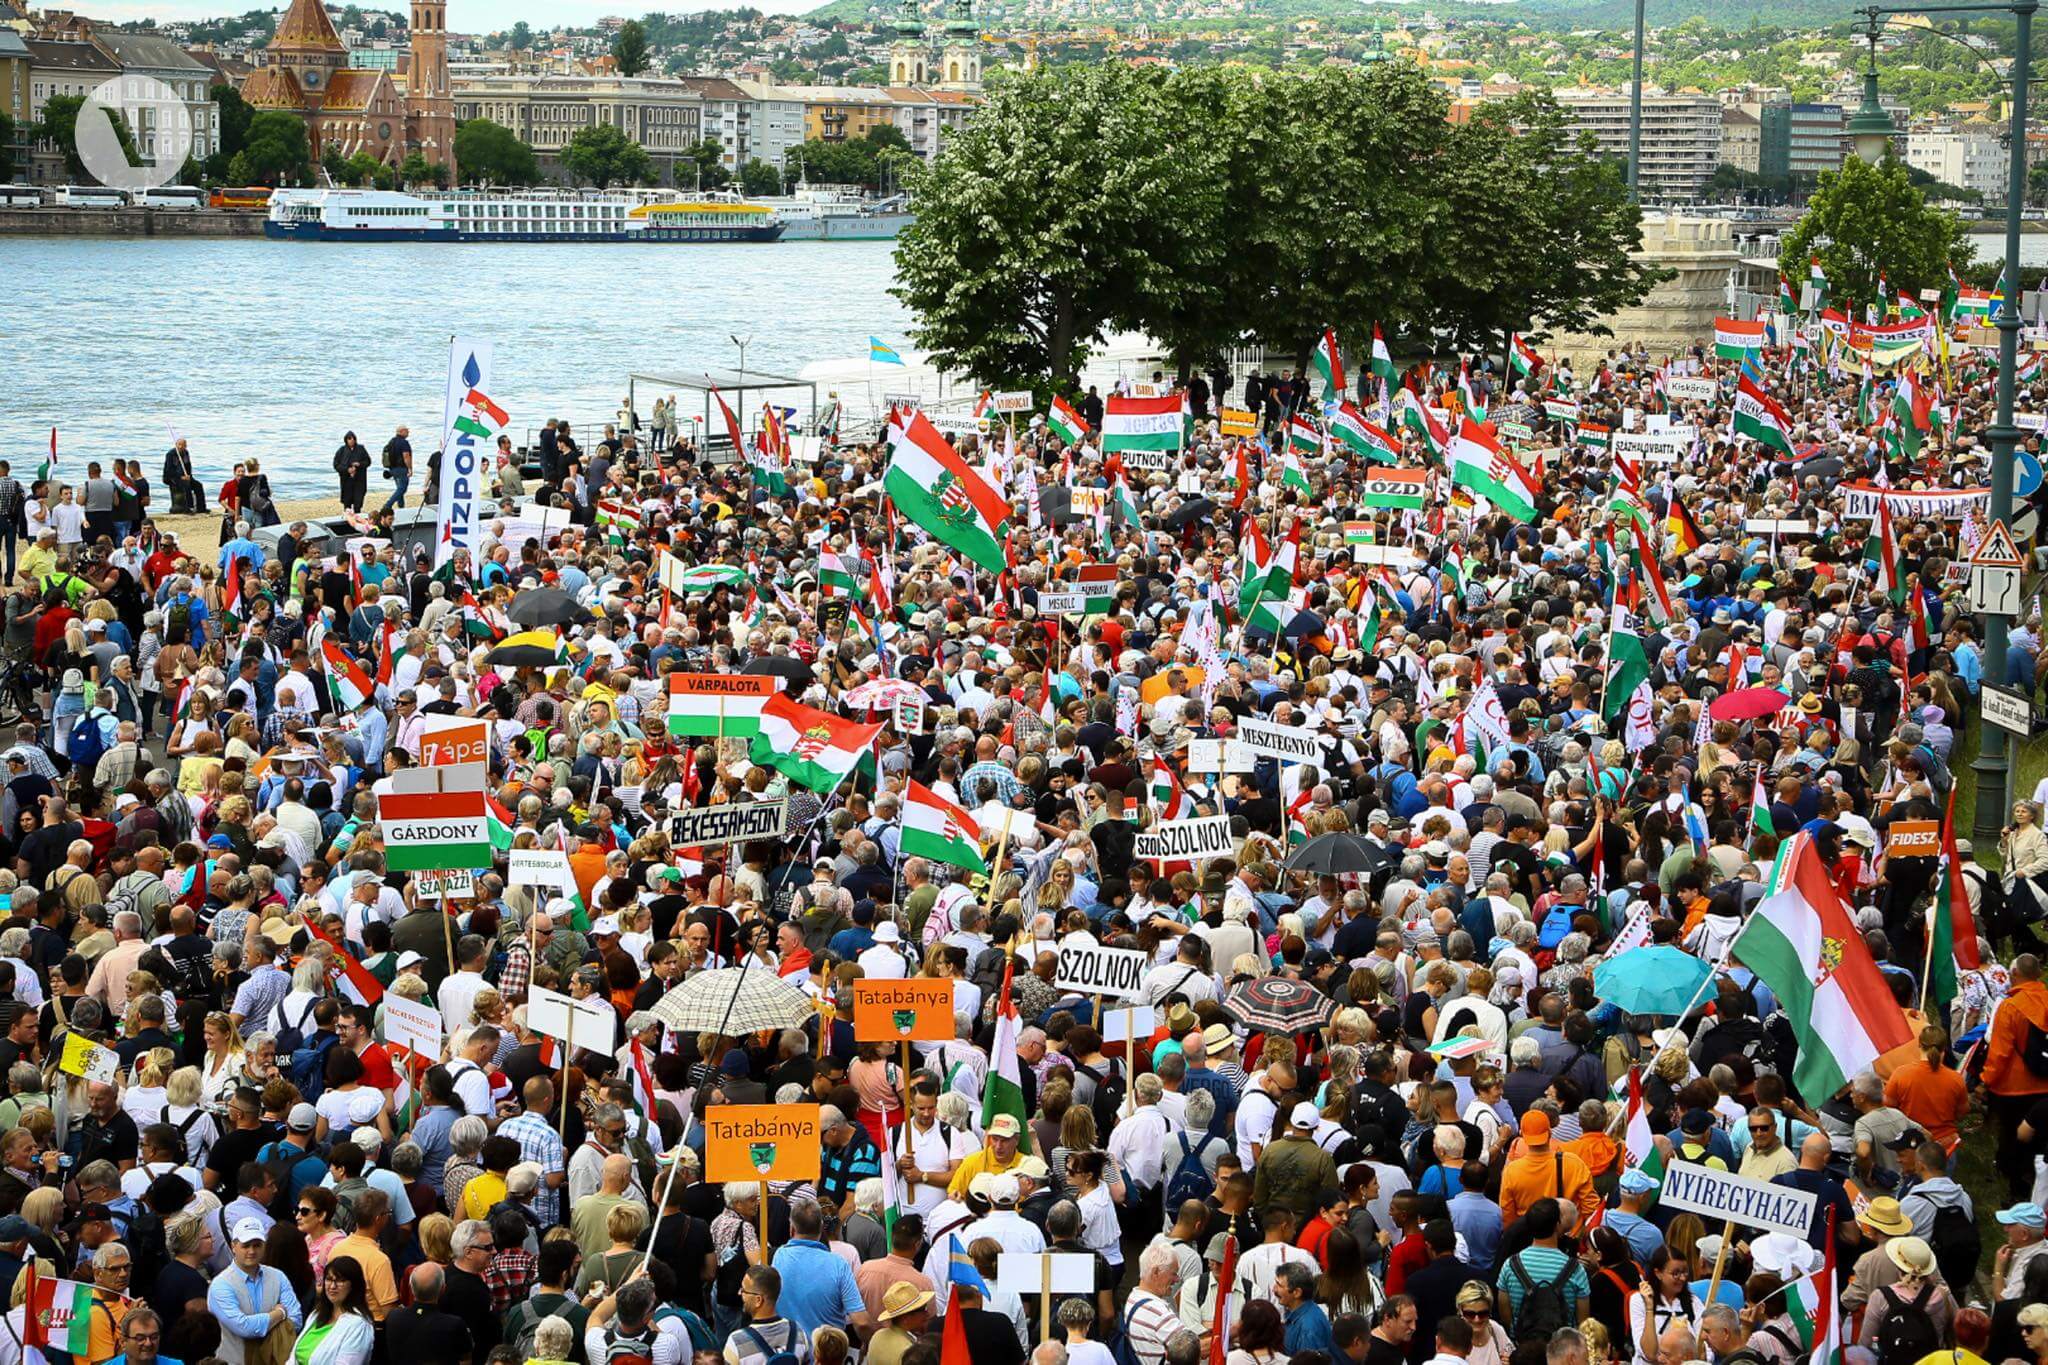 Opinion: Fidesz Still Number One, TISZA Strong Second - New Era in Hungarian Politics?